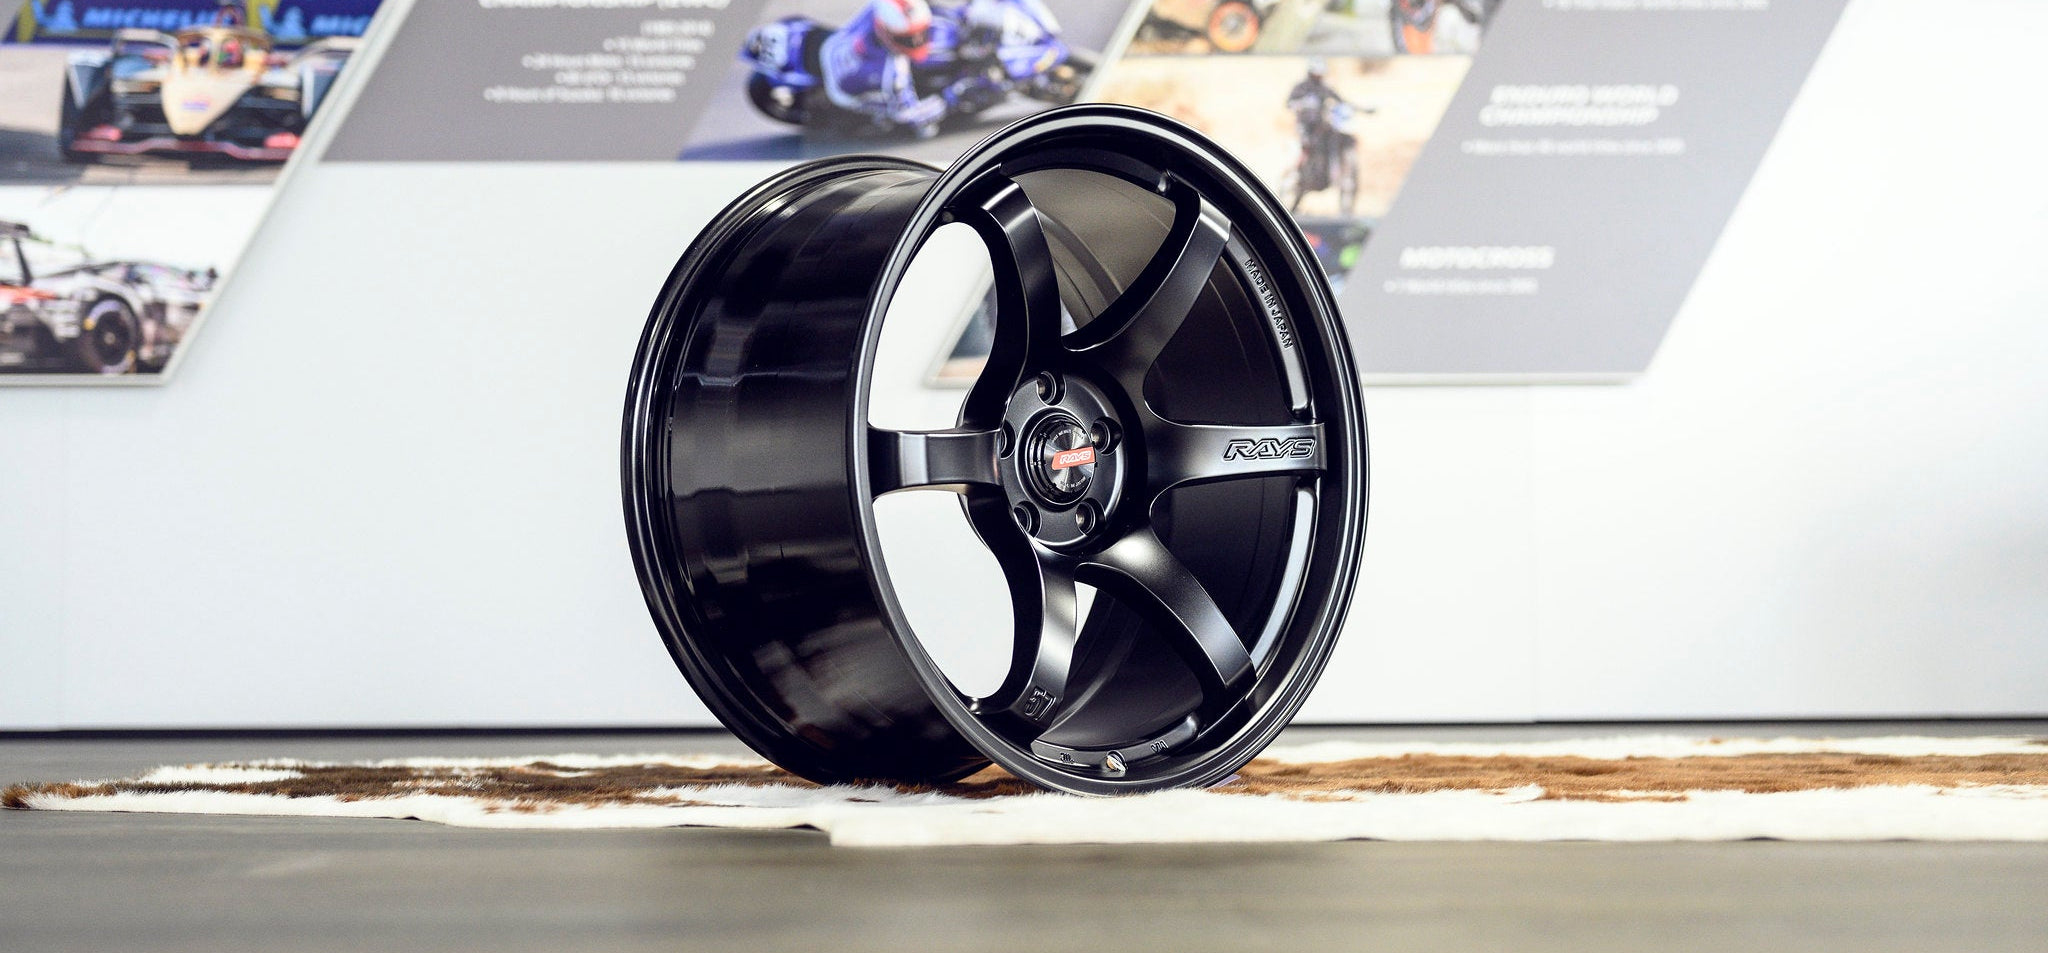 gramLIGHTS 57DR FK8/FL5 Type R - Premium Wheels from Gram Lights - From just $570.0! Shop now at MK MOTORSPORTS